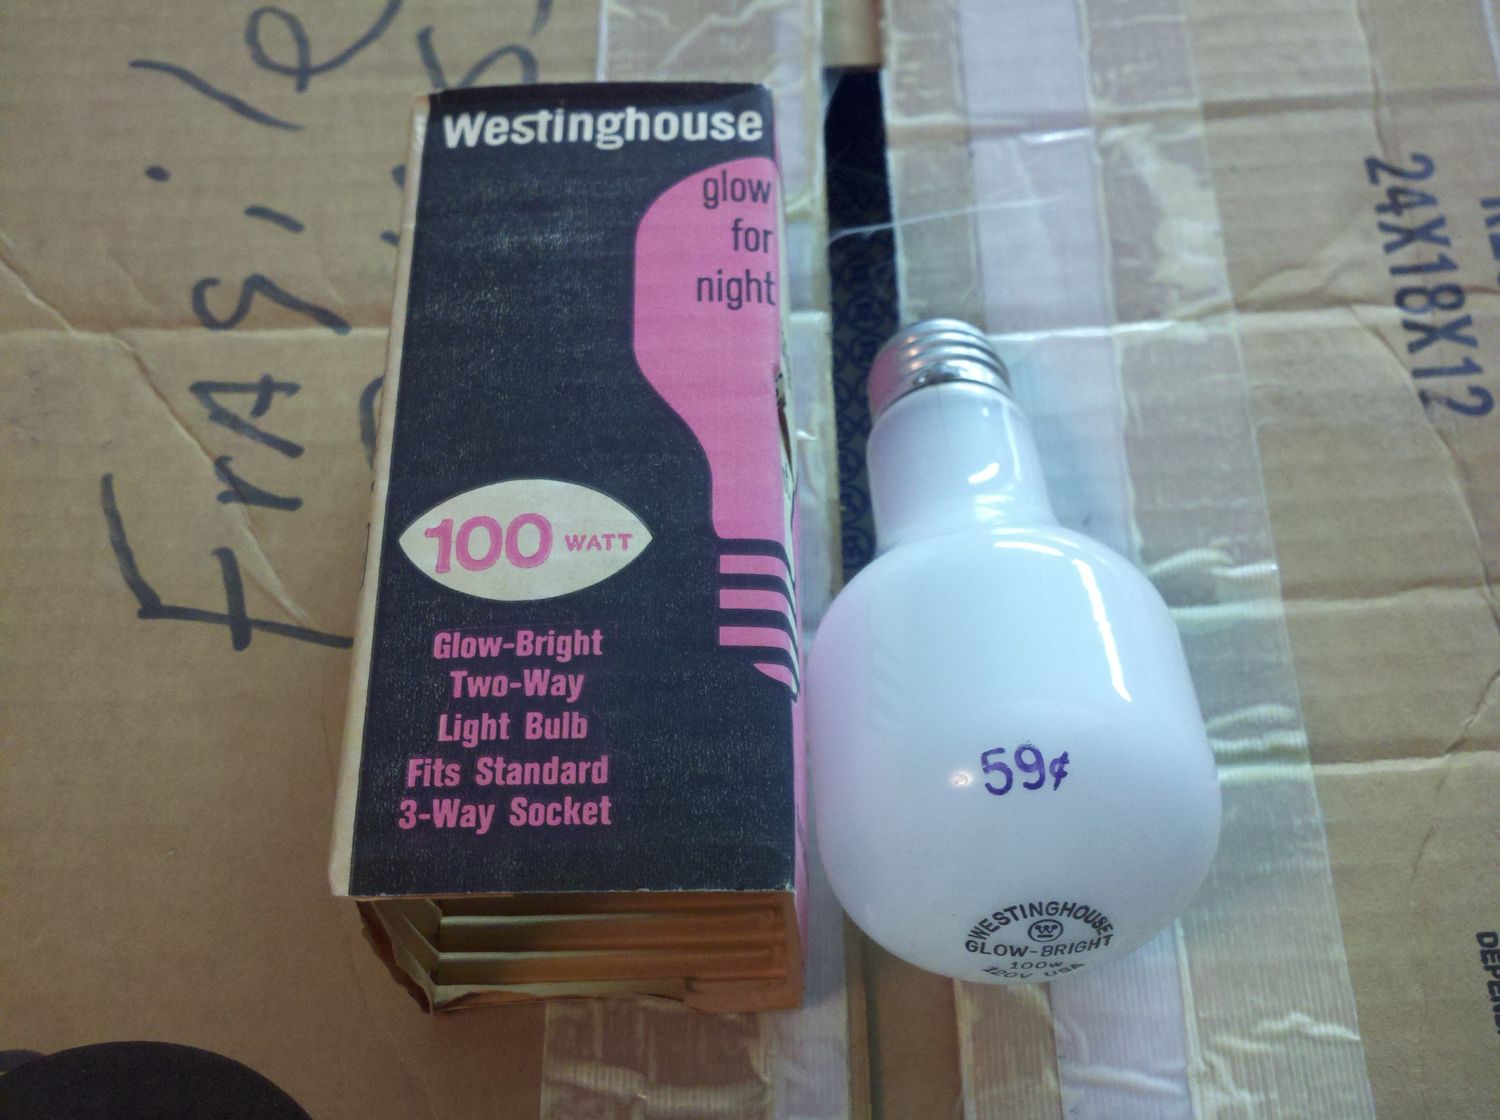 Westinghouse Glow-Bright 100w 2 way bulb VERY RARE!
It is labelled as a 3 way but it works just like a 3 way. It has 2 filaments, a 7w night light mode and a 100w main light mode. Technically this is a 7-100-107w, but the 7w filament adds so little light in the third setting you can't really notice it is any brighter. The 7w filament is a straight single coil C-6, the 100w filament is a CC-6.
Keywords: Lamps